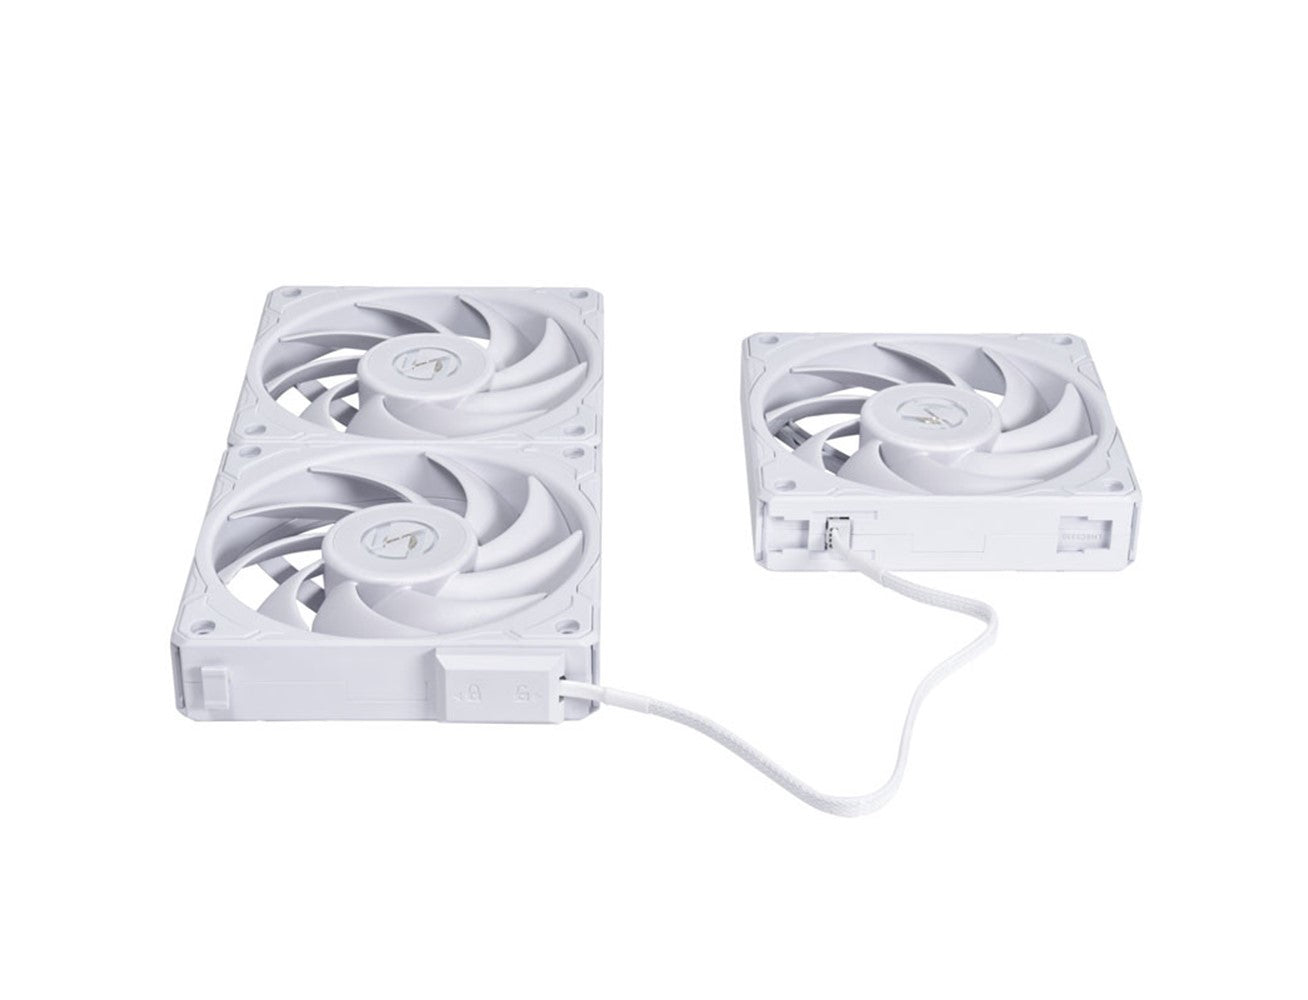 Lian Li PWM 120mm 2600RPM (3pcs) with Controller/Extension Cable 28mm Thickness - White